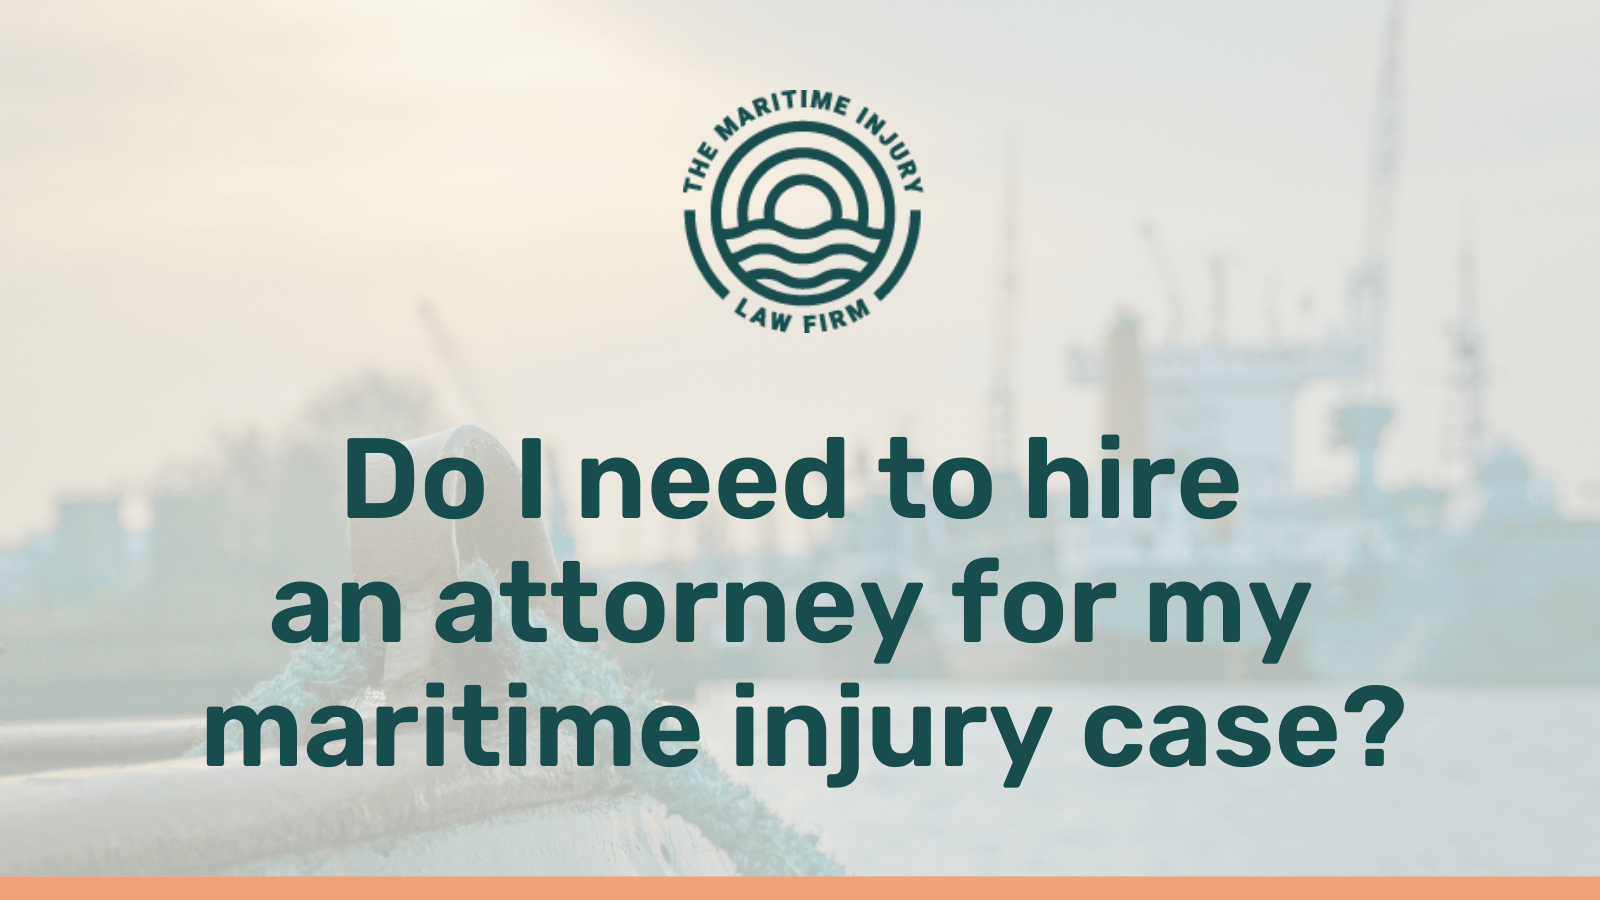 Do I need to hire an attorney for my gulf coast maritime injury case - maritime injury law firm - George Vourvoulias